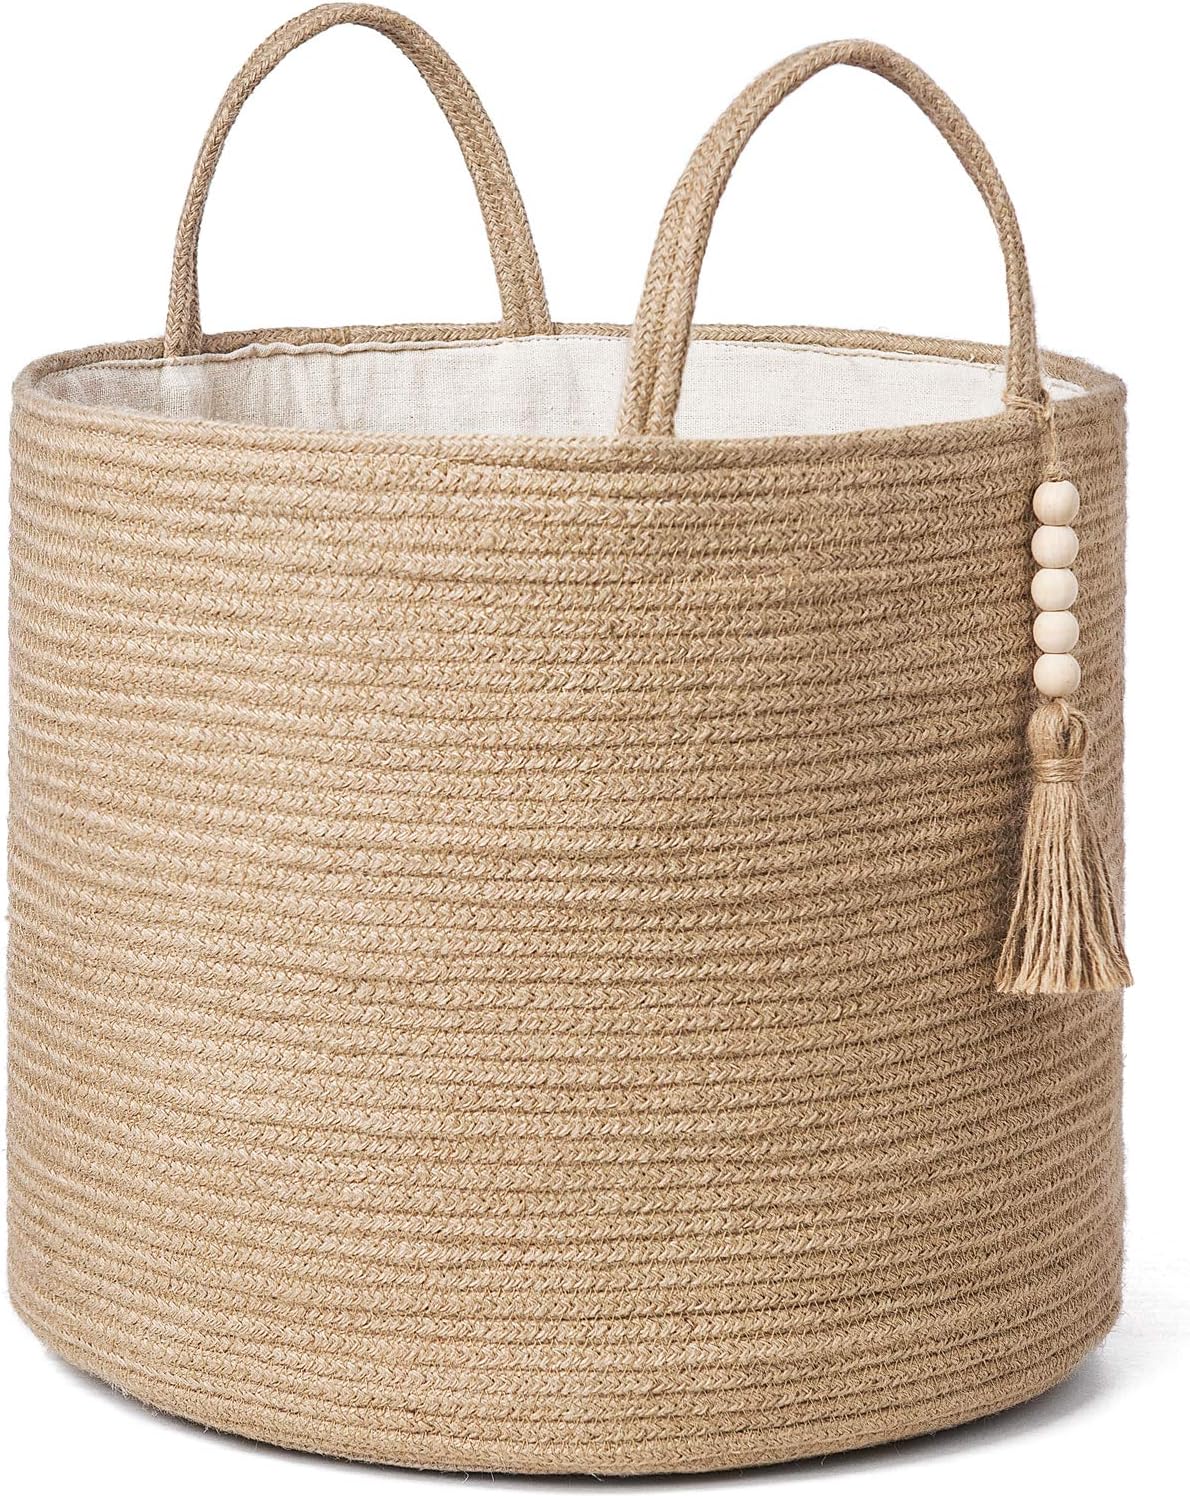  Mkono Woven Storage Basket Decorative Rope Basket Wooden Bead Decoration for Blankets,Toys,Clothes,Shoes,Plant Organizer Bin with Handles Living Room Home Decor, Jute, 16 W  13.8L 